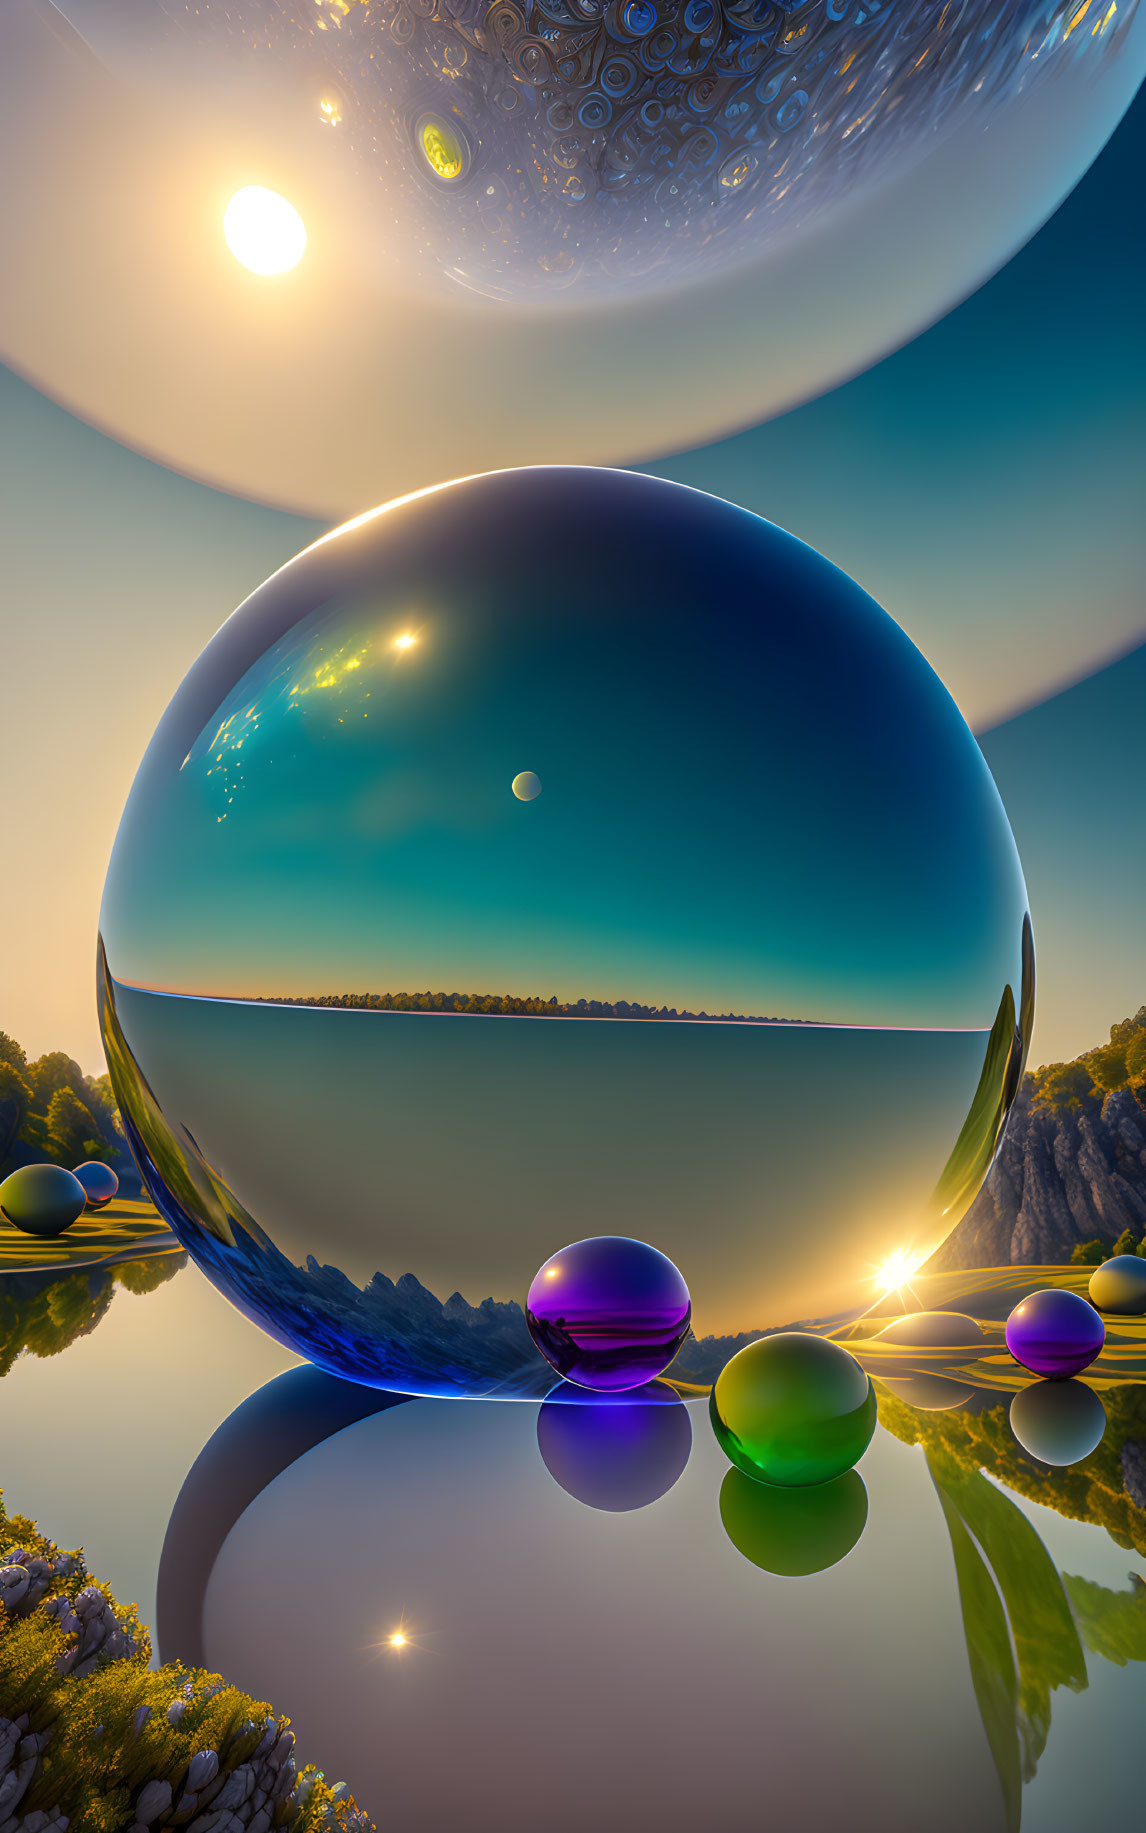 Surreal landscape: floating reflective spheres on water under two suns